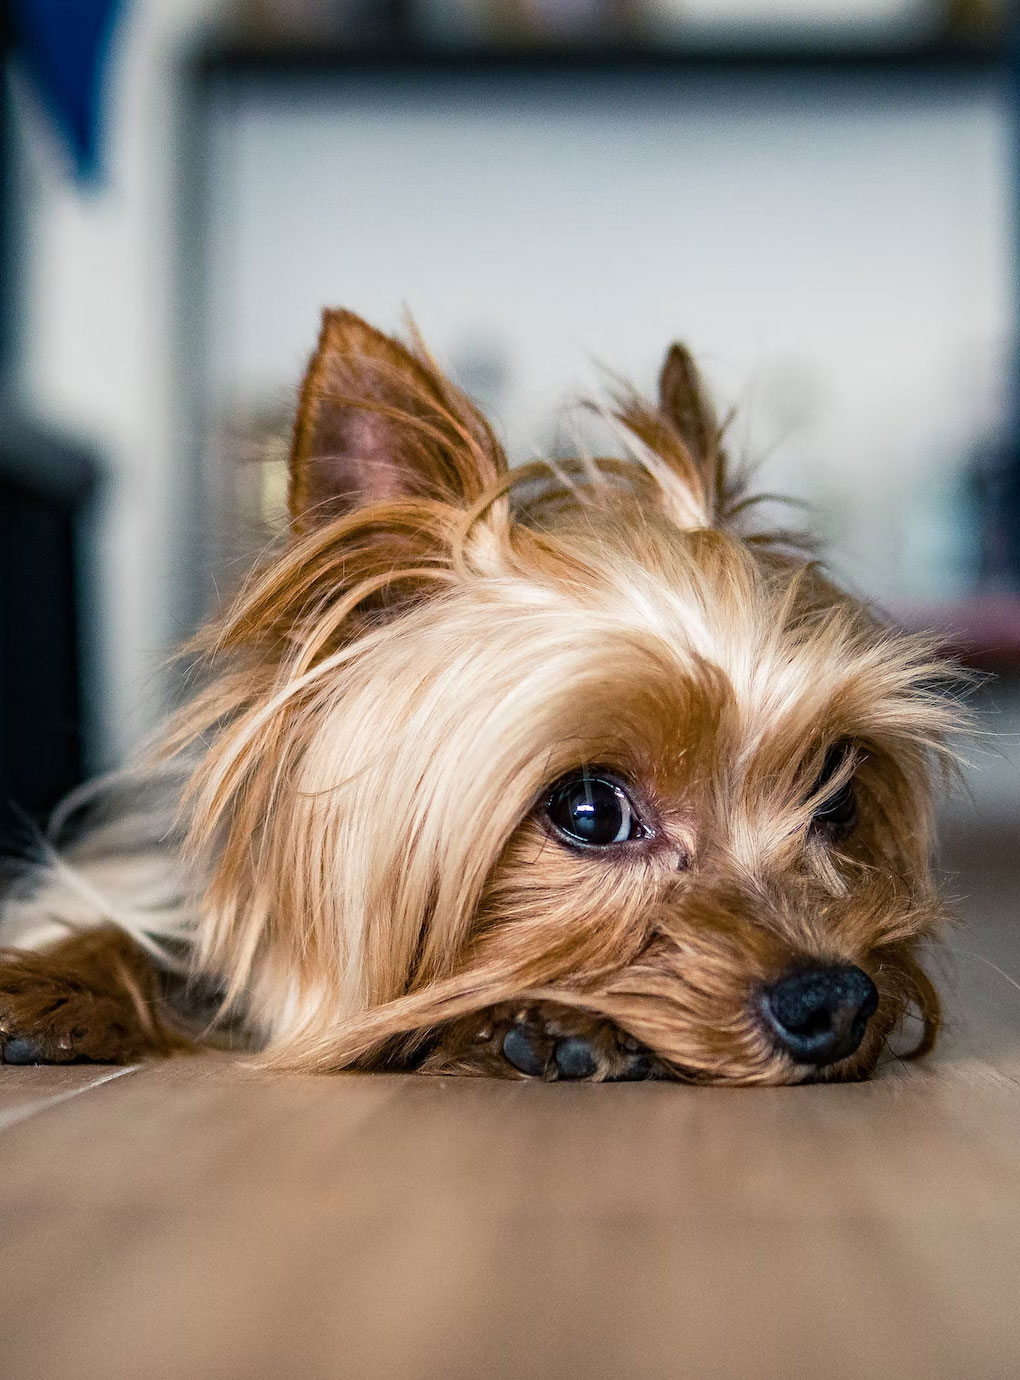 How much exercise should my Yorkie get?